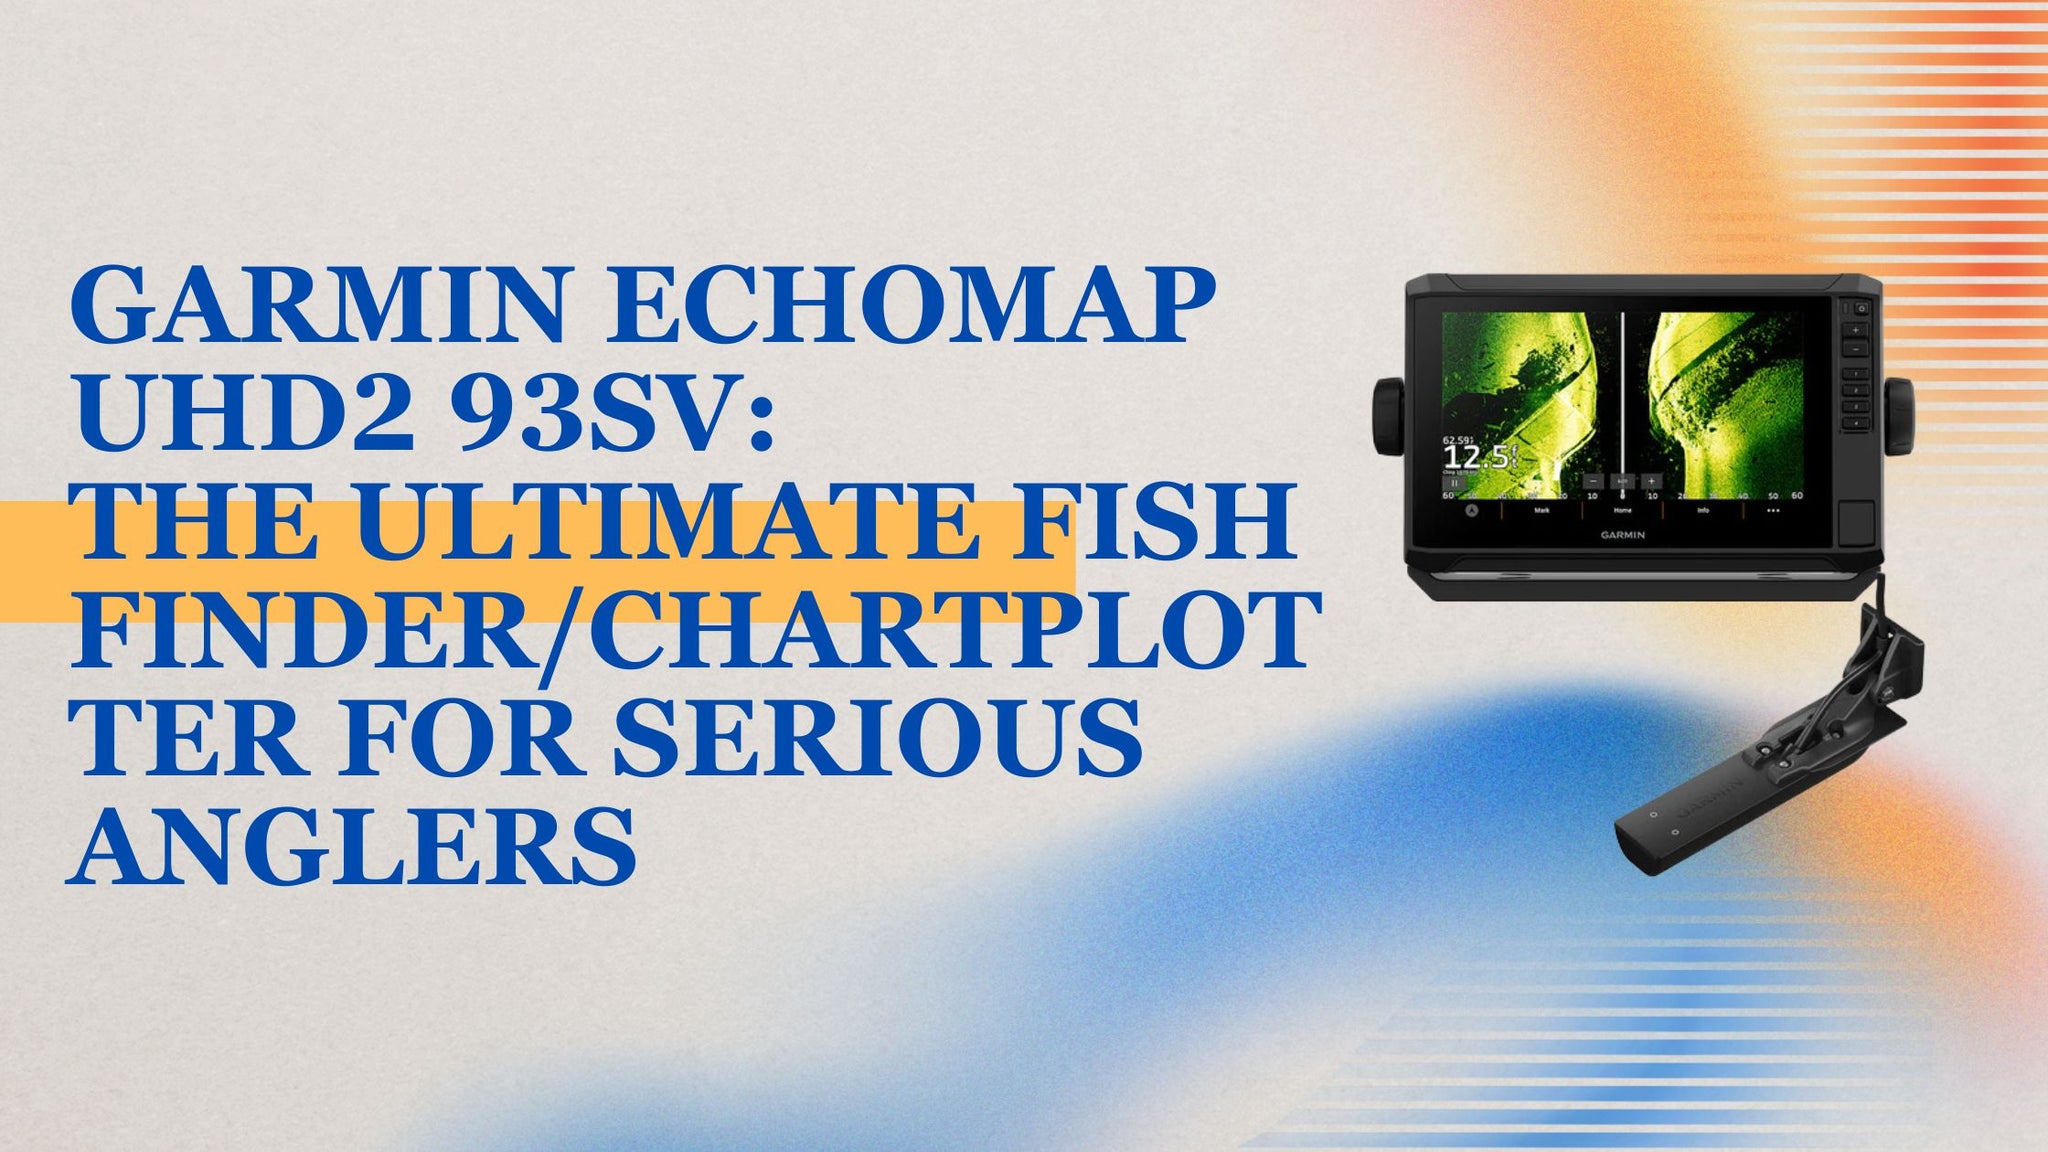 Garmin ECHOMAP UHD2 93sv The Ultimate Fish Finder/Chartplotter for Serious Anglers